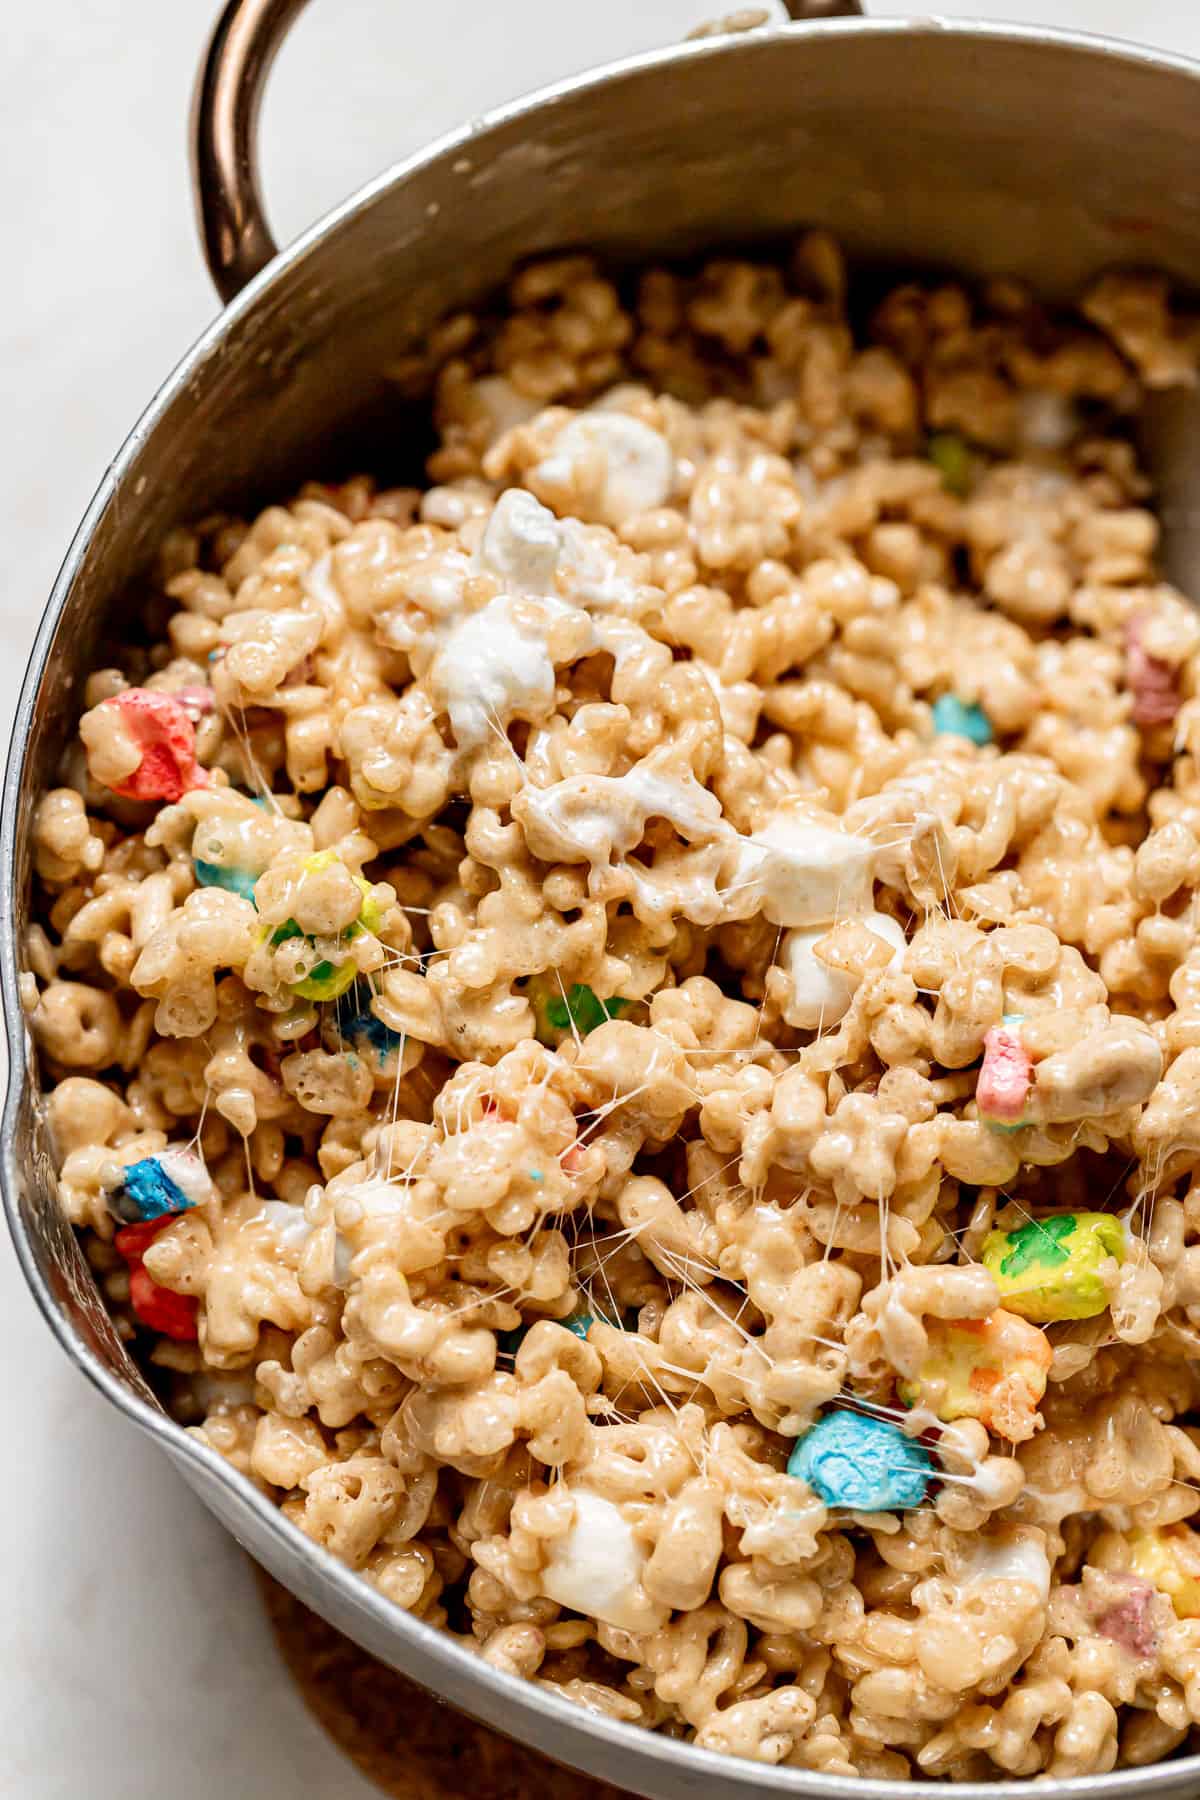 lucky charms Rice Krispies mixture in saucepan.